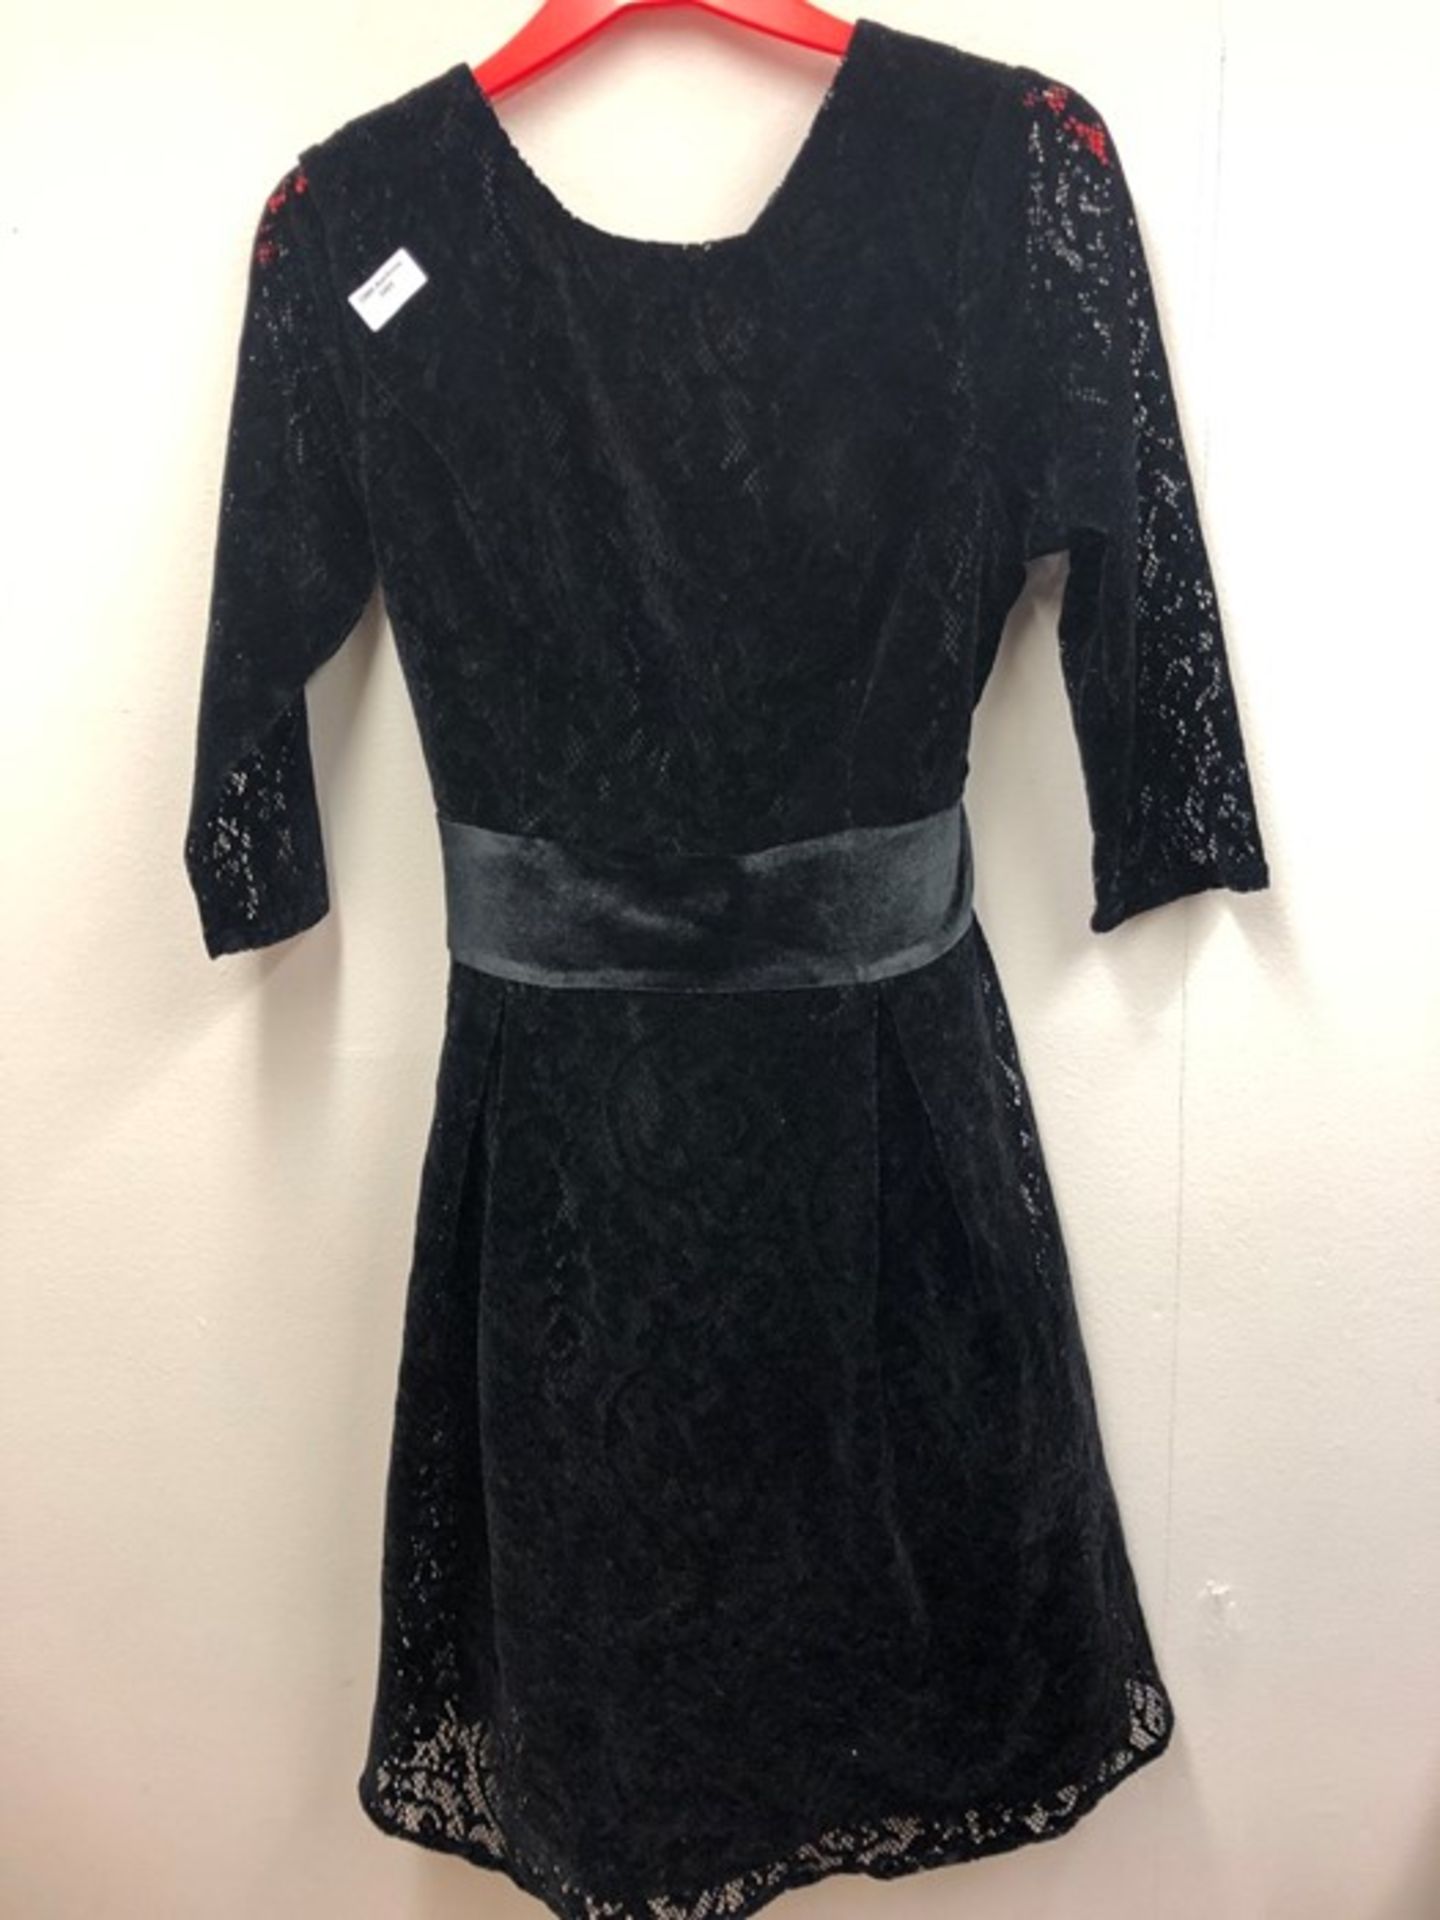 1 MADEMOISELLE BLACK COAT / SIZE R (VIEWING HIGHLY